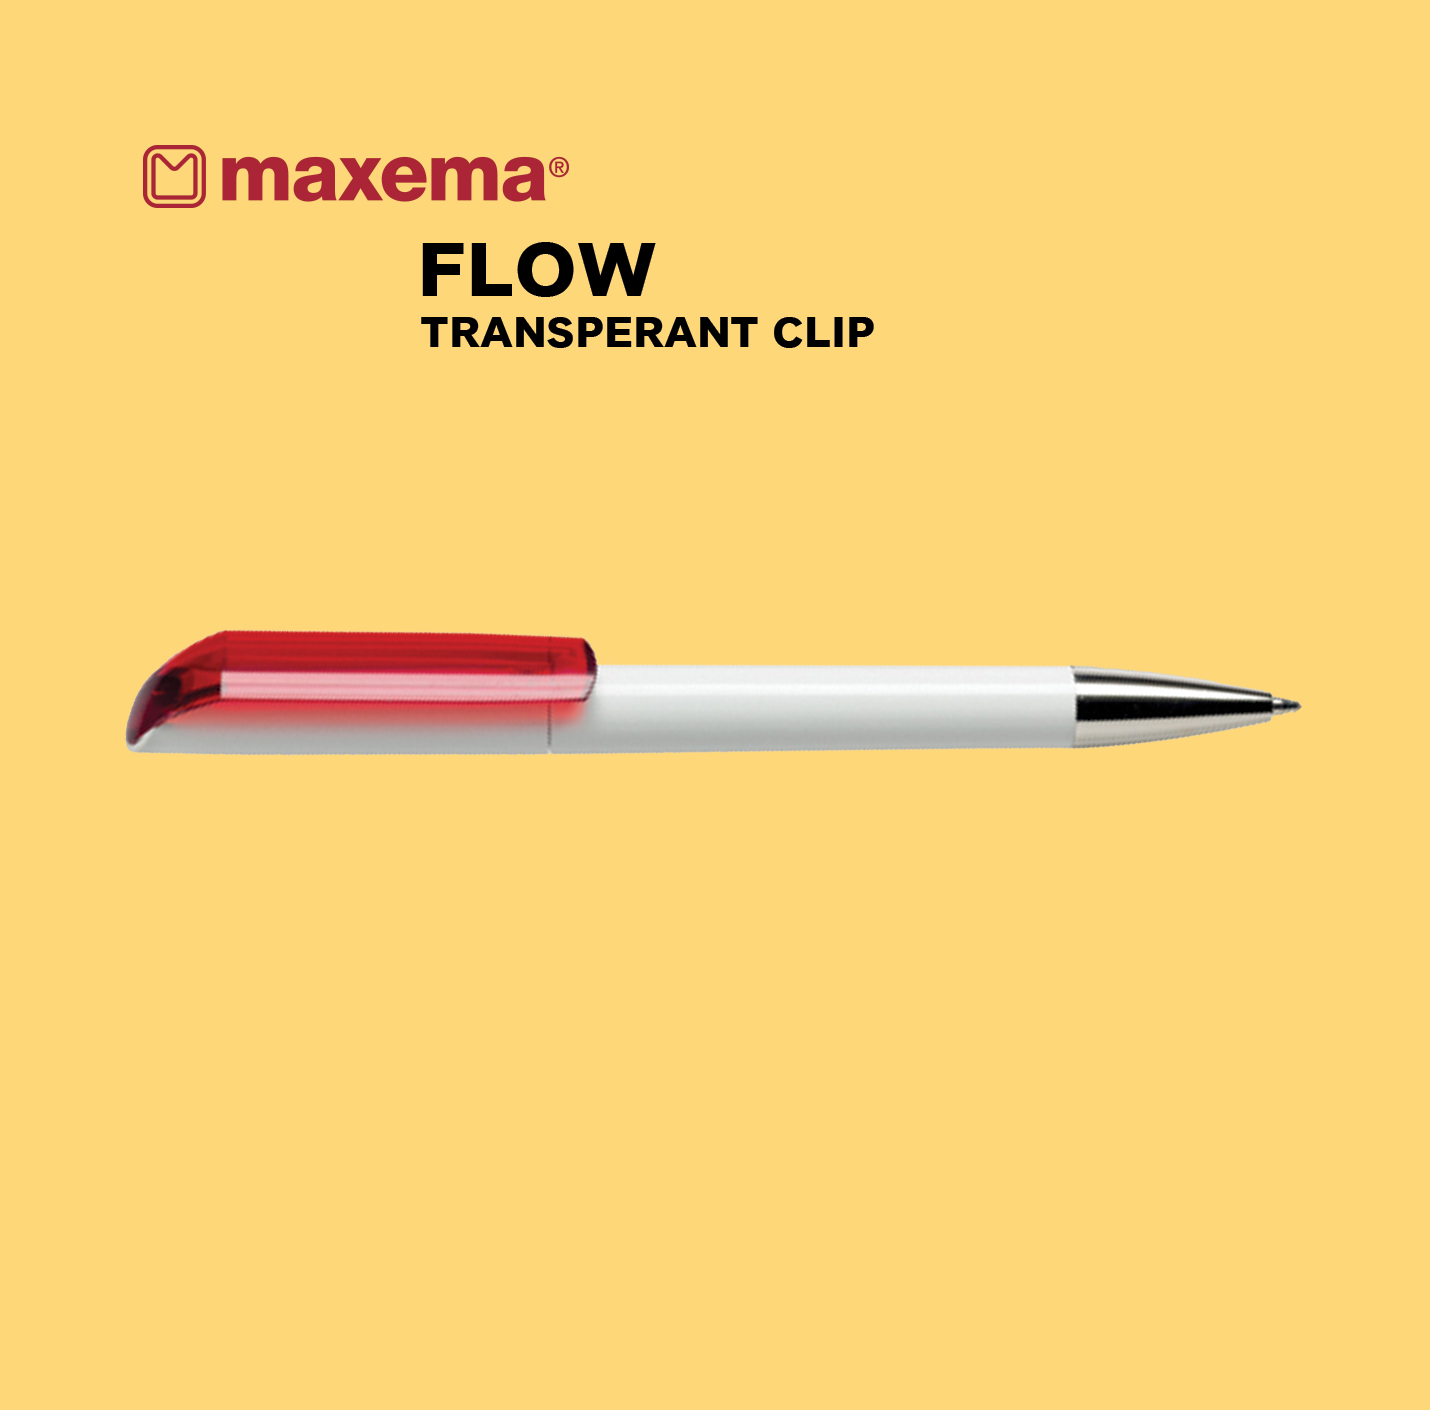 Promotional Maxema Flow Pens